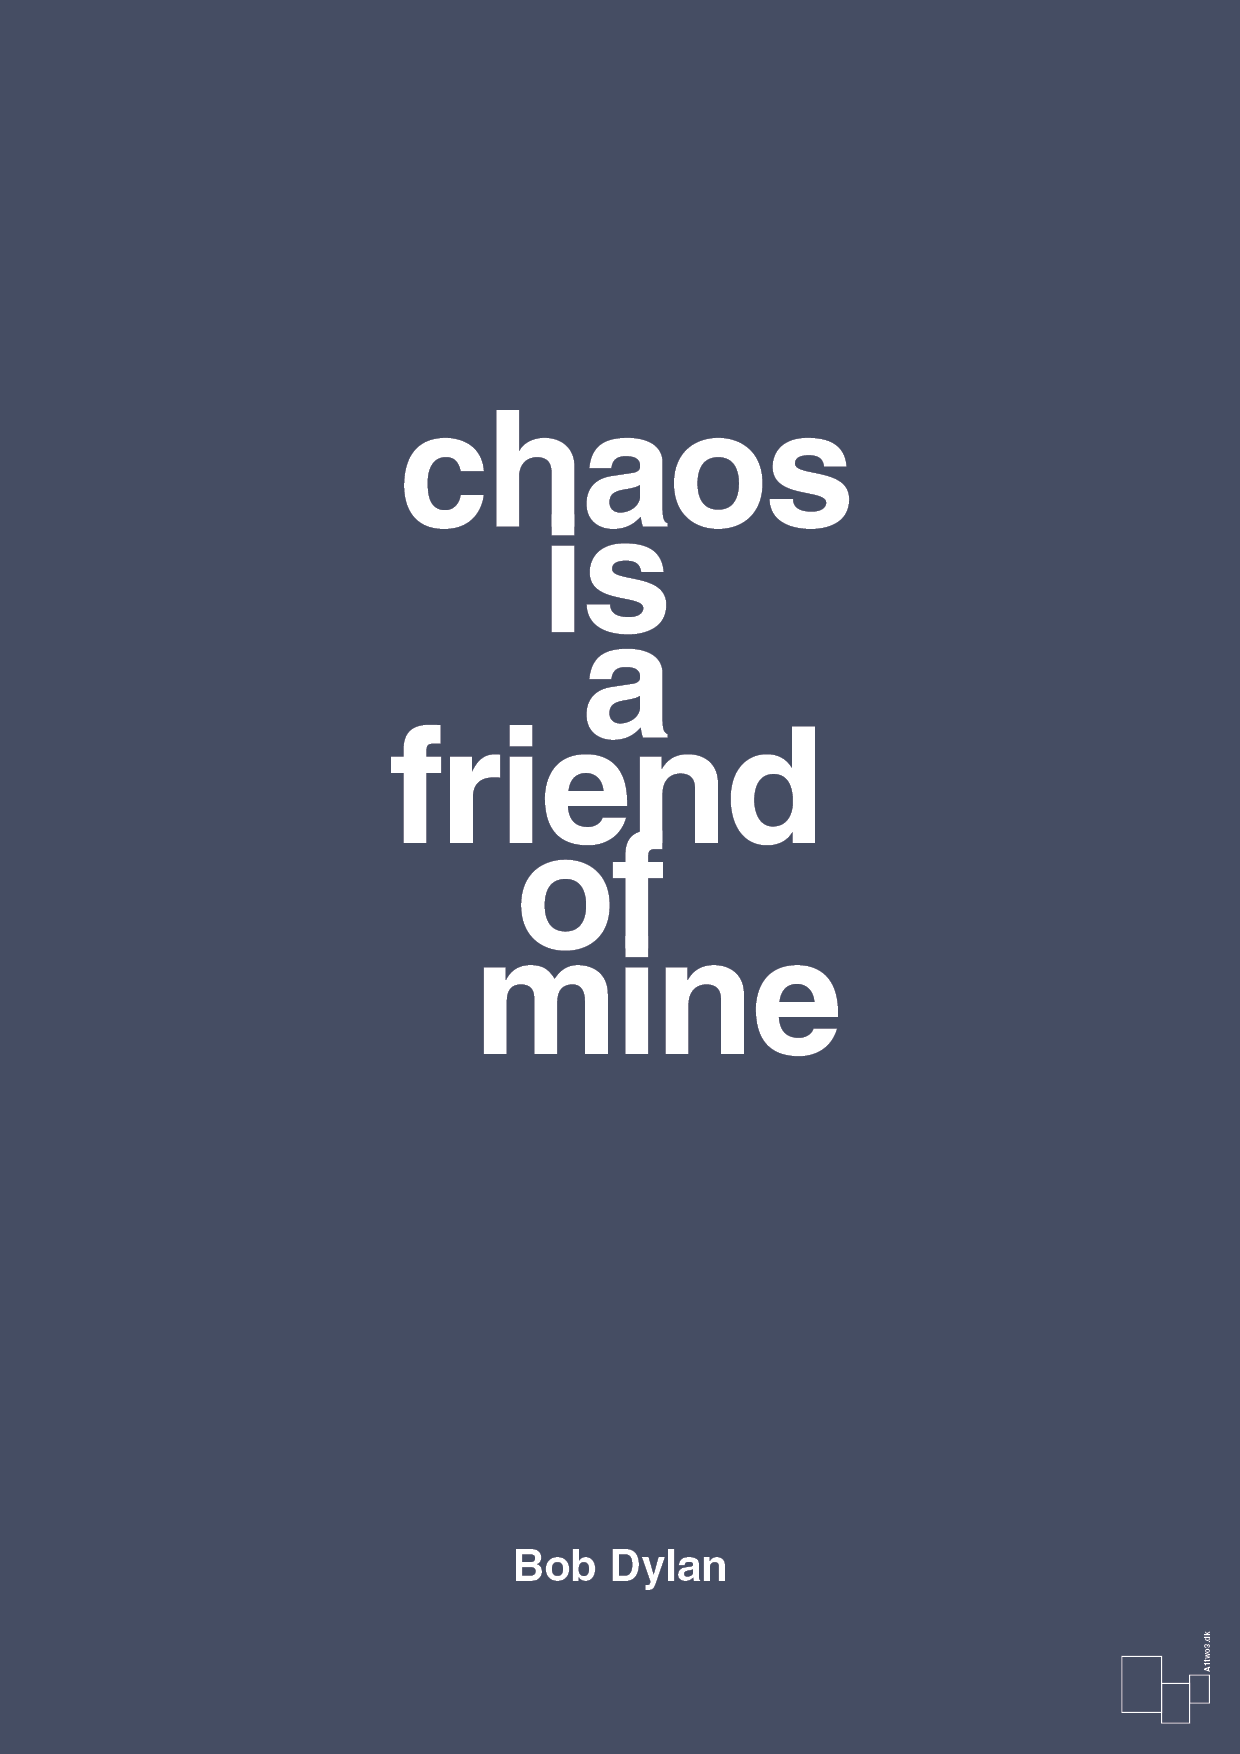 chaos is a friend of mine - Plakat med Citater i Petrol